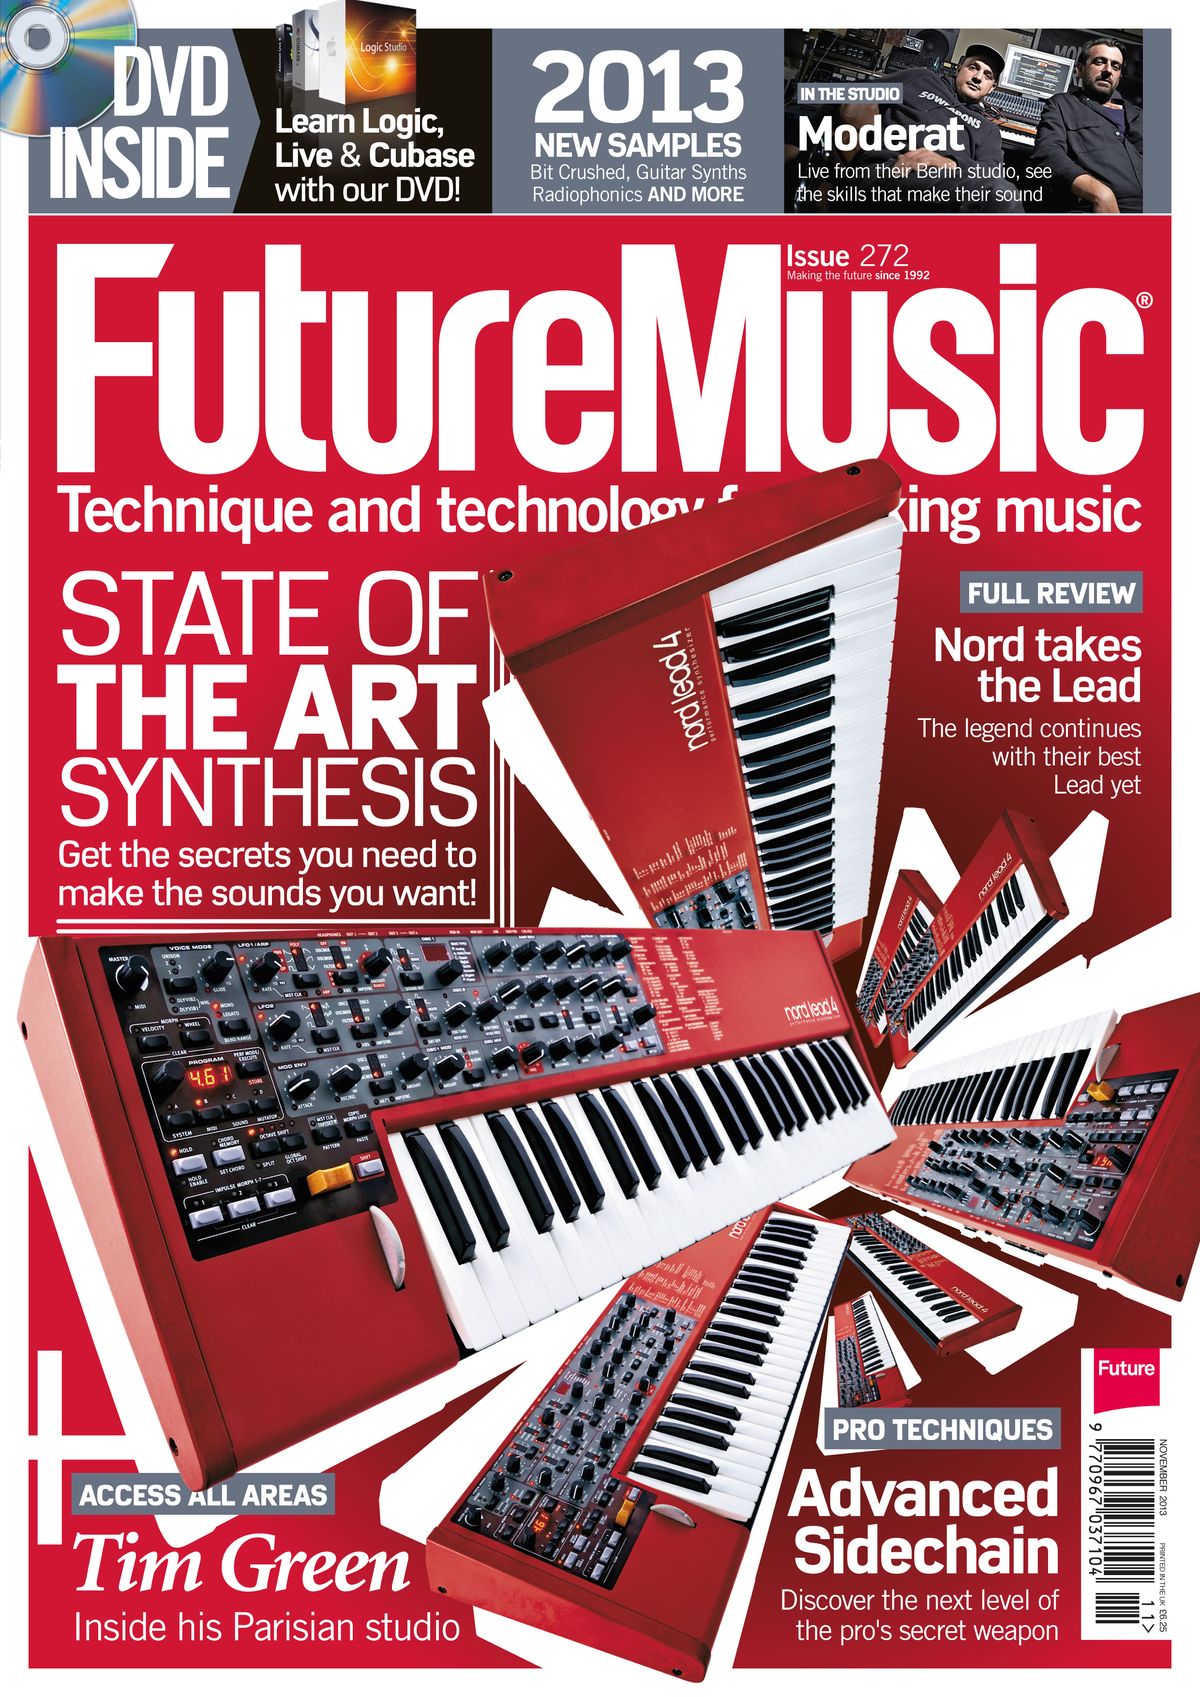 Issue 272 of Future Music is on sale now